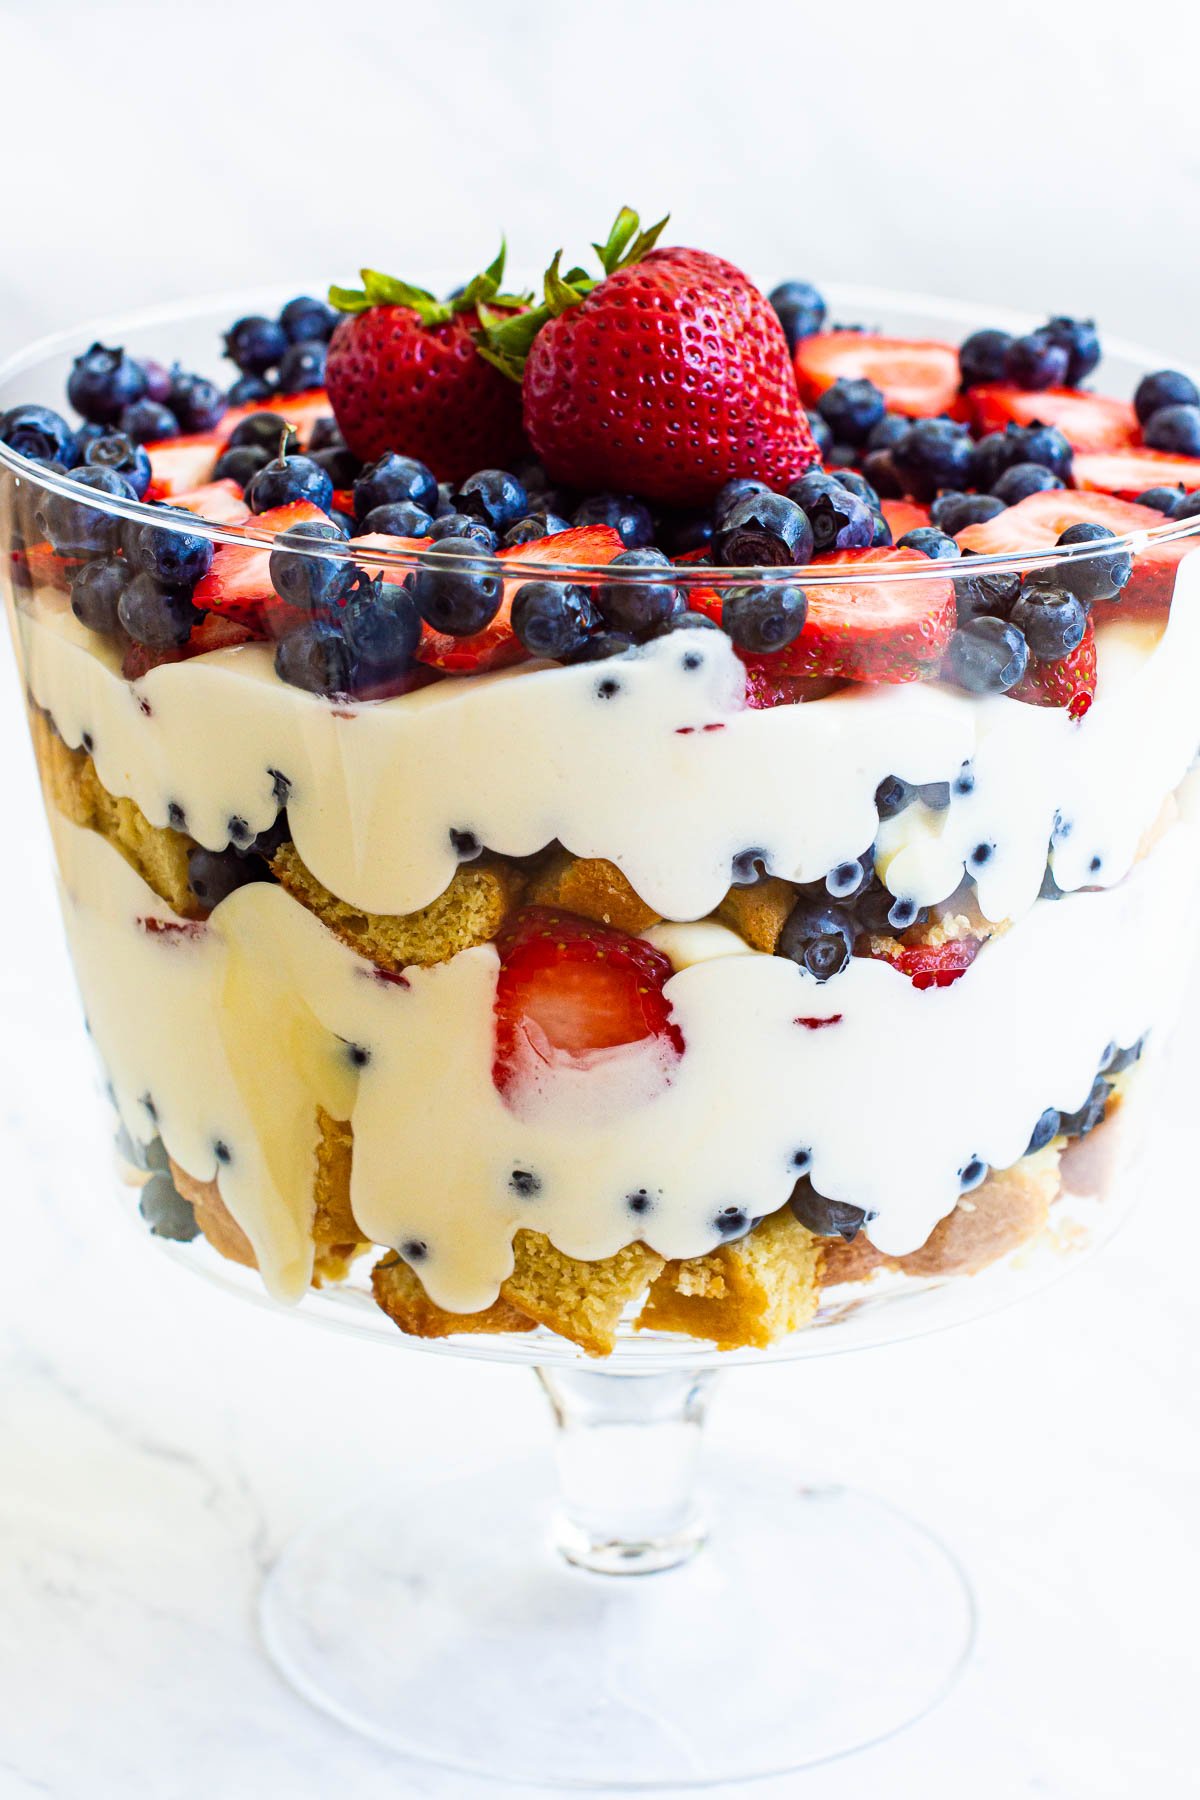 Cake, cream, blueberries and strawberries layered in glass trifle bowl.